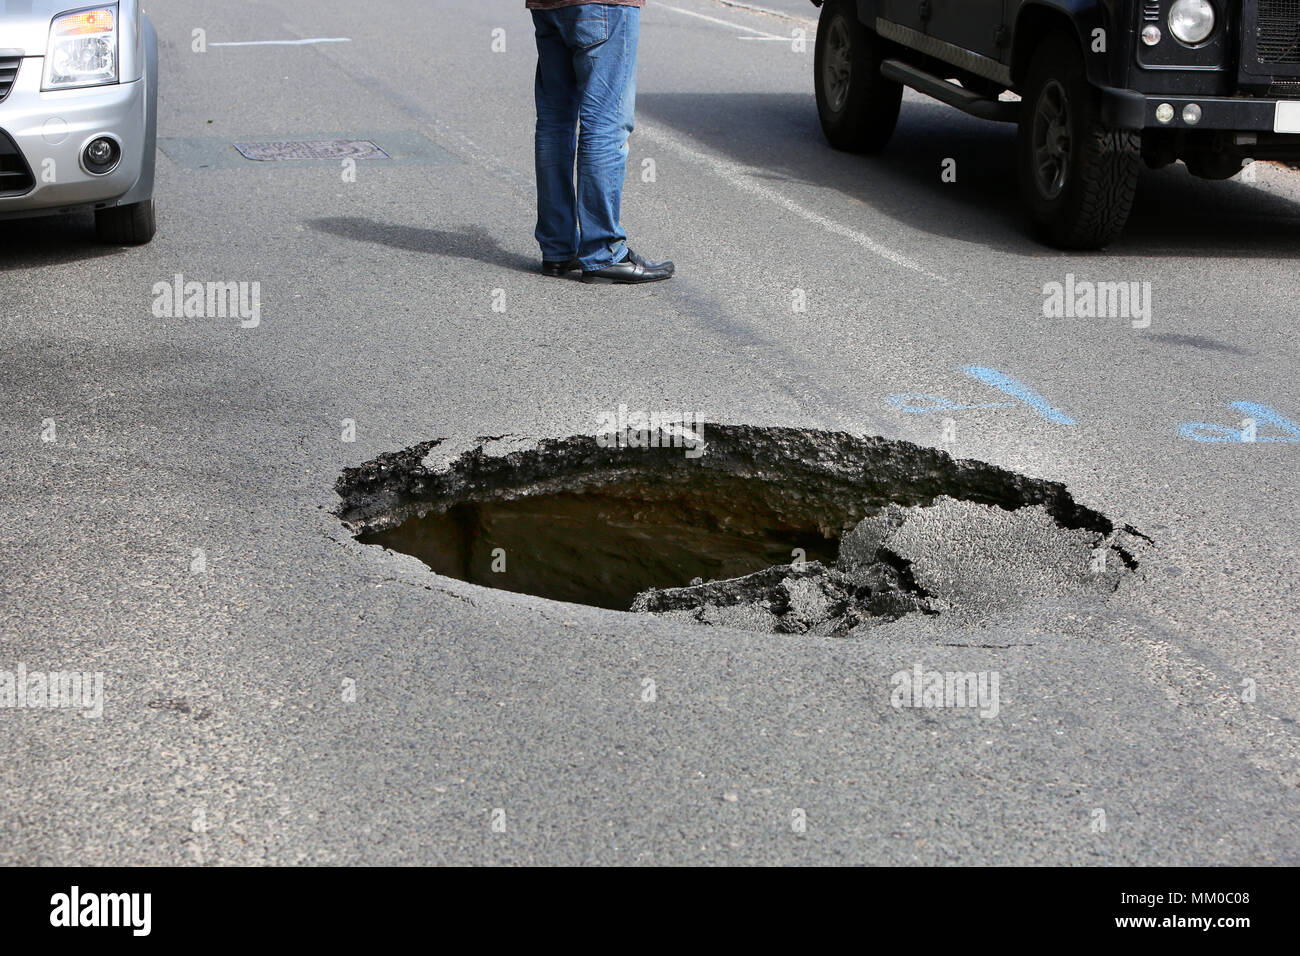 Midhurst, Near Chichester, West Sussex, UK. A huge sink hole pictured on Bepton Road, close to the high street and causing long delays. Members of the public directed traffic for over 45minutes until police arrived to close the road.  Wednesday 9th May 2018 © Sam Stephenson/Alamy Live News. Stock Photo